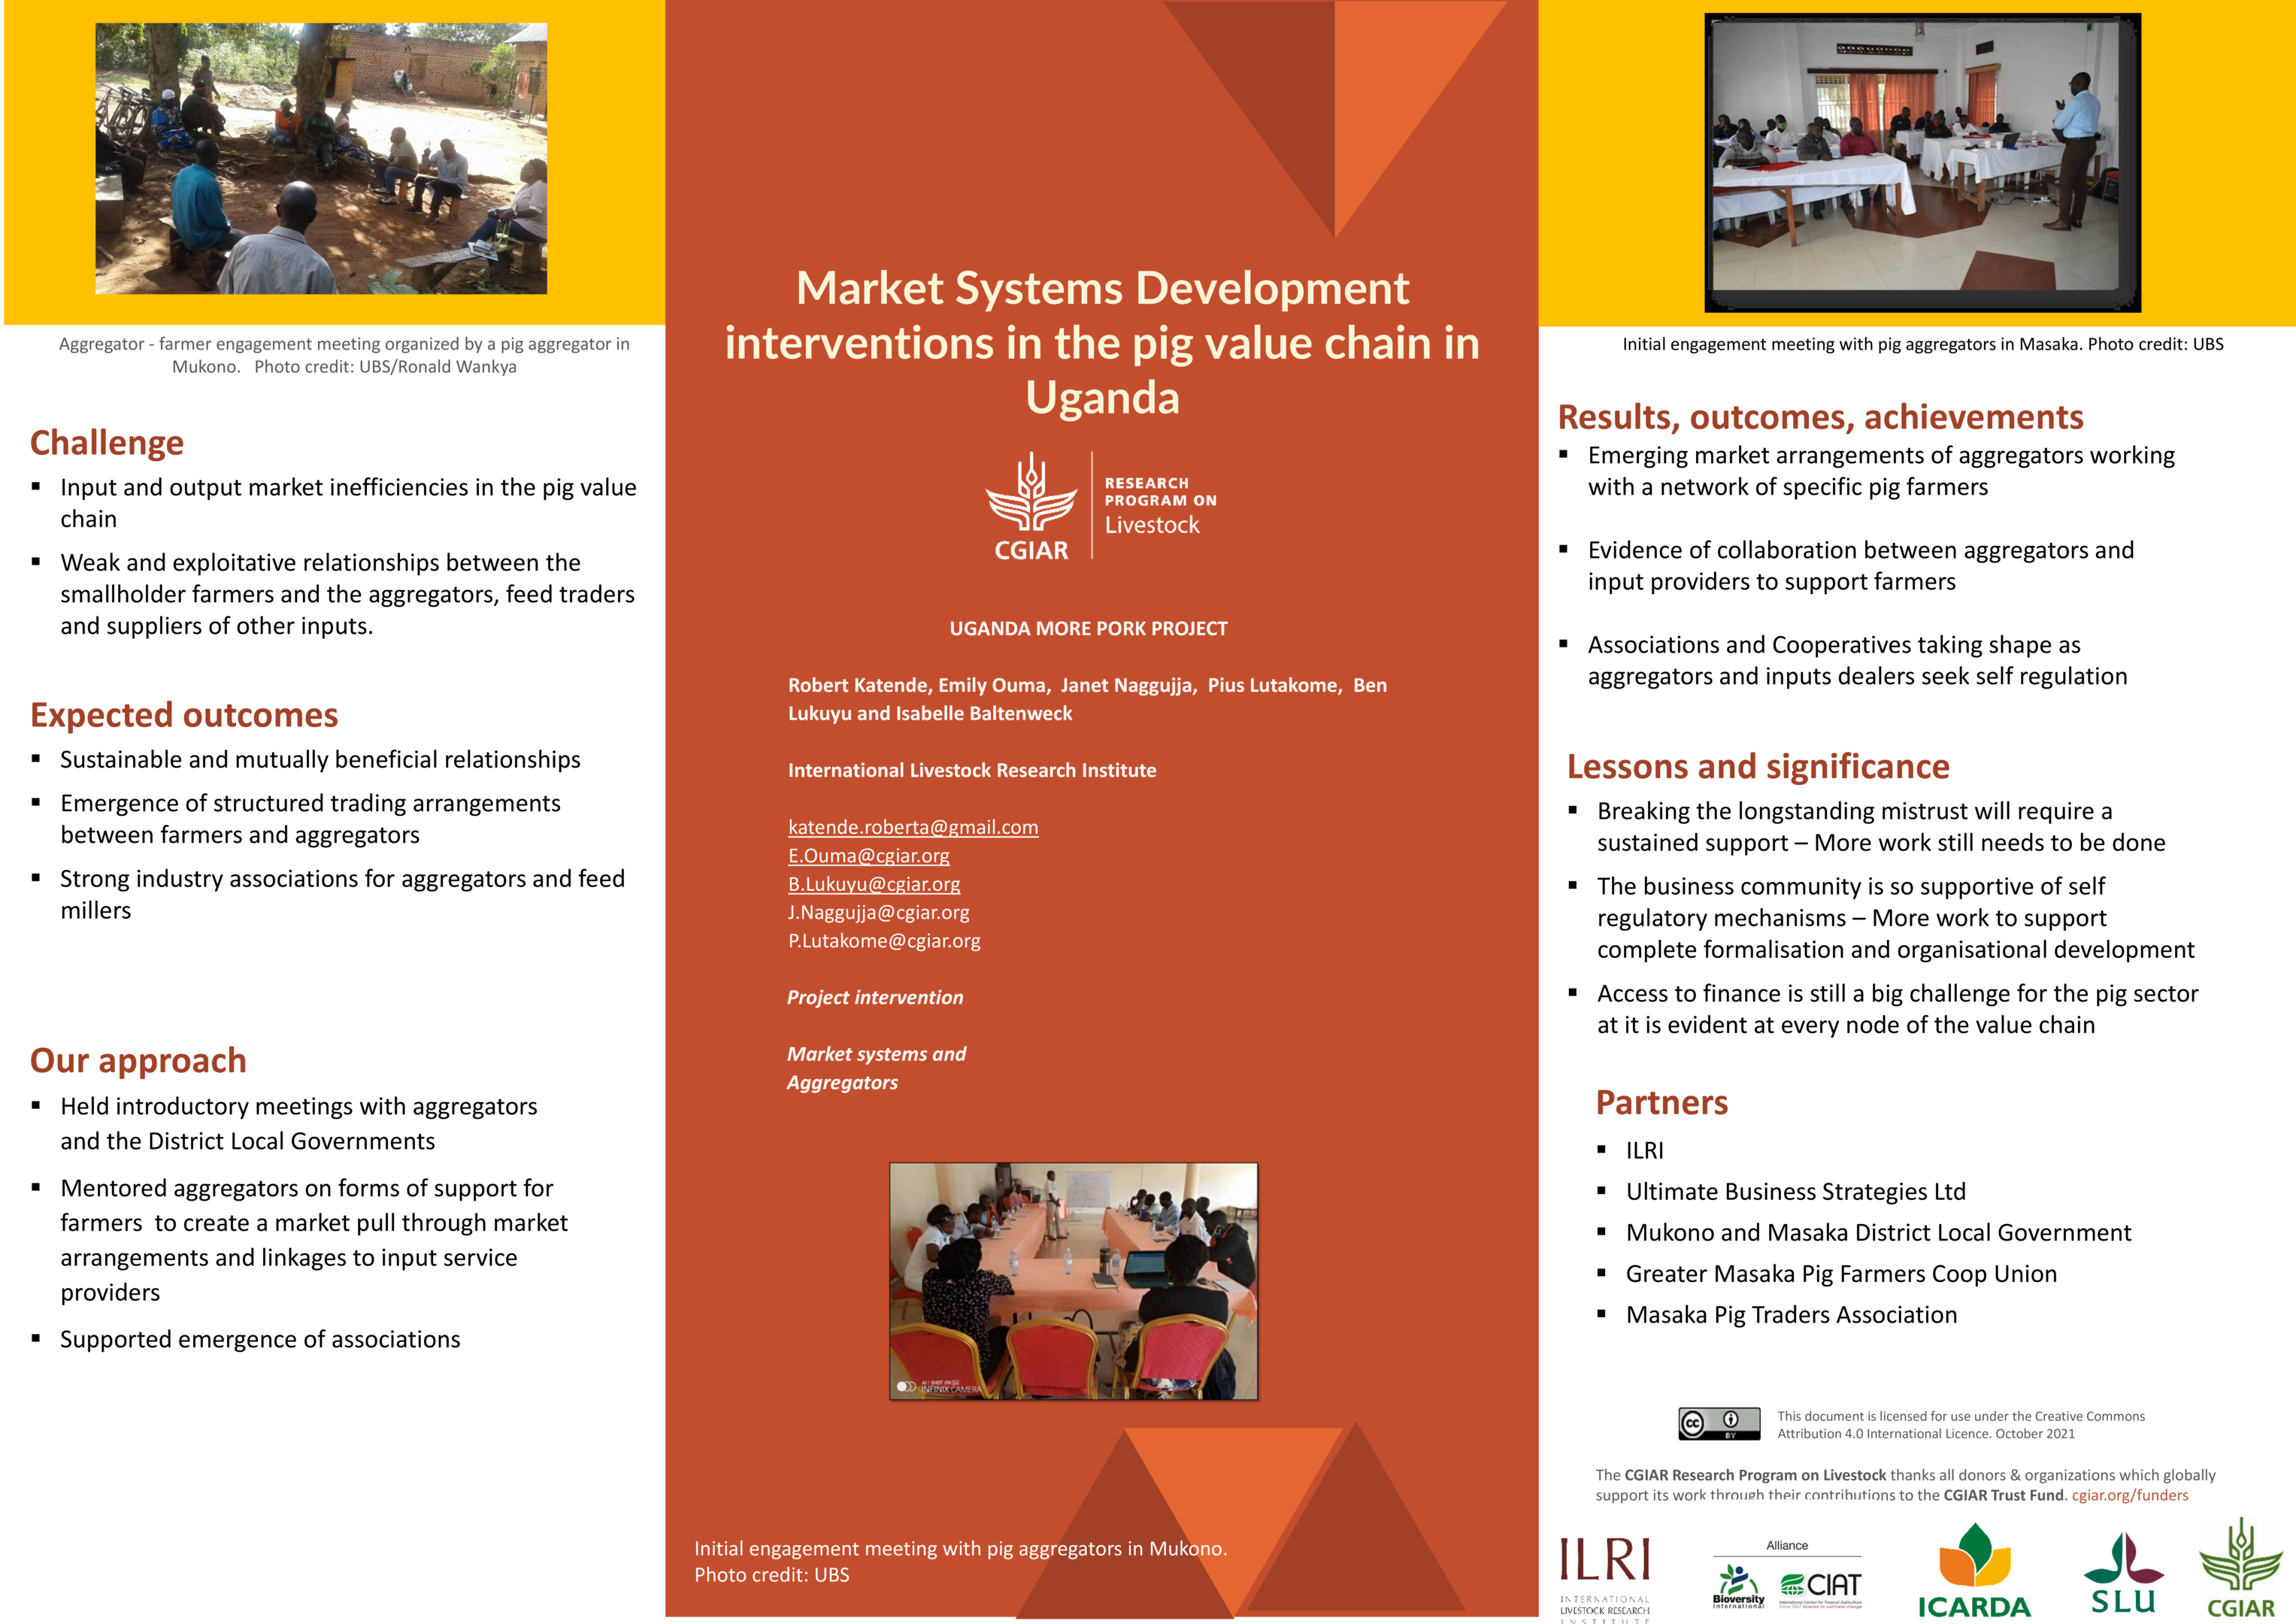 7. Market Systems Development interventions in the pig value chain  in Uganda